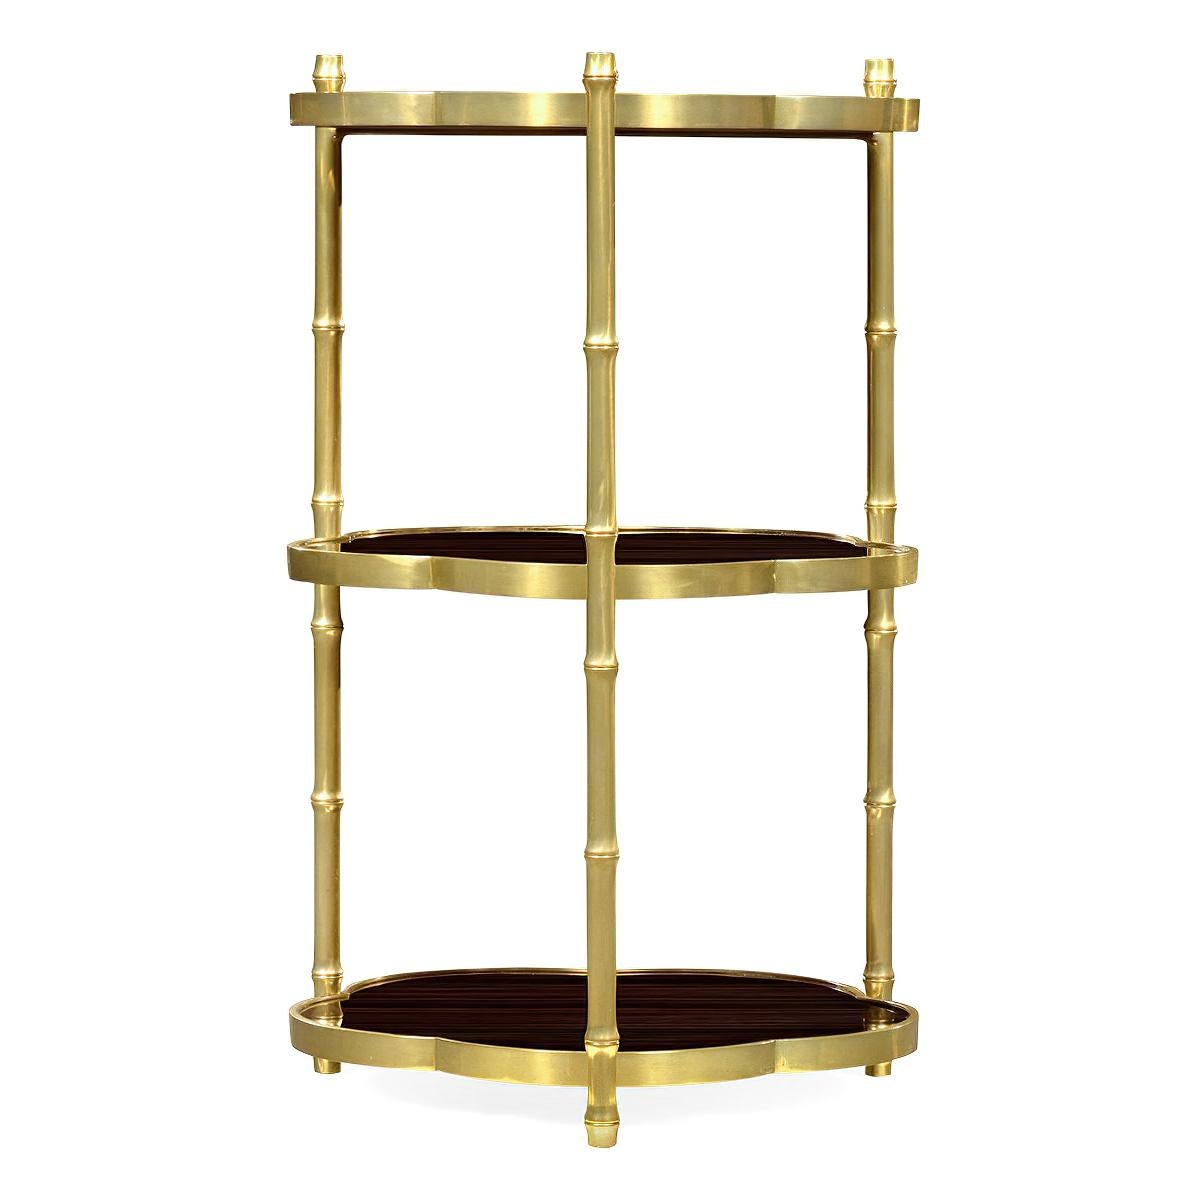 Regency style three-tier faux bamboo brass side table étagère with Macassar ebony shelves with hand-painted white flower designs on the top tier.

Dimensions: 16 1/8